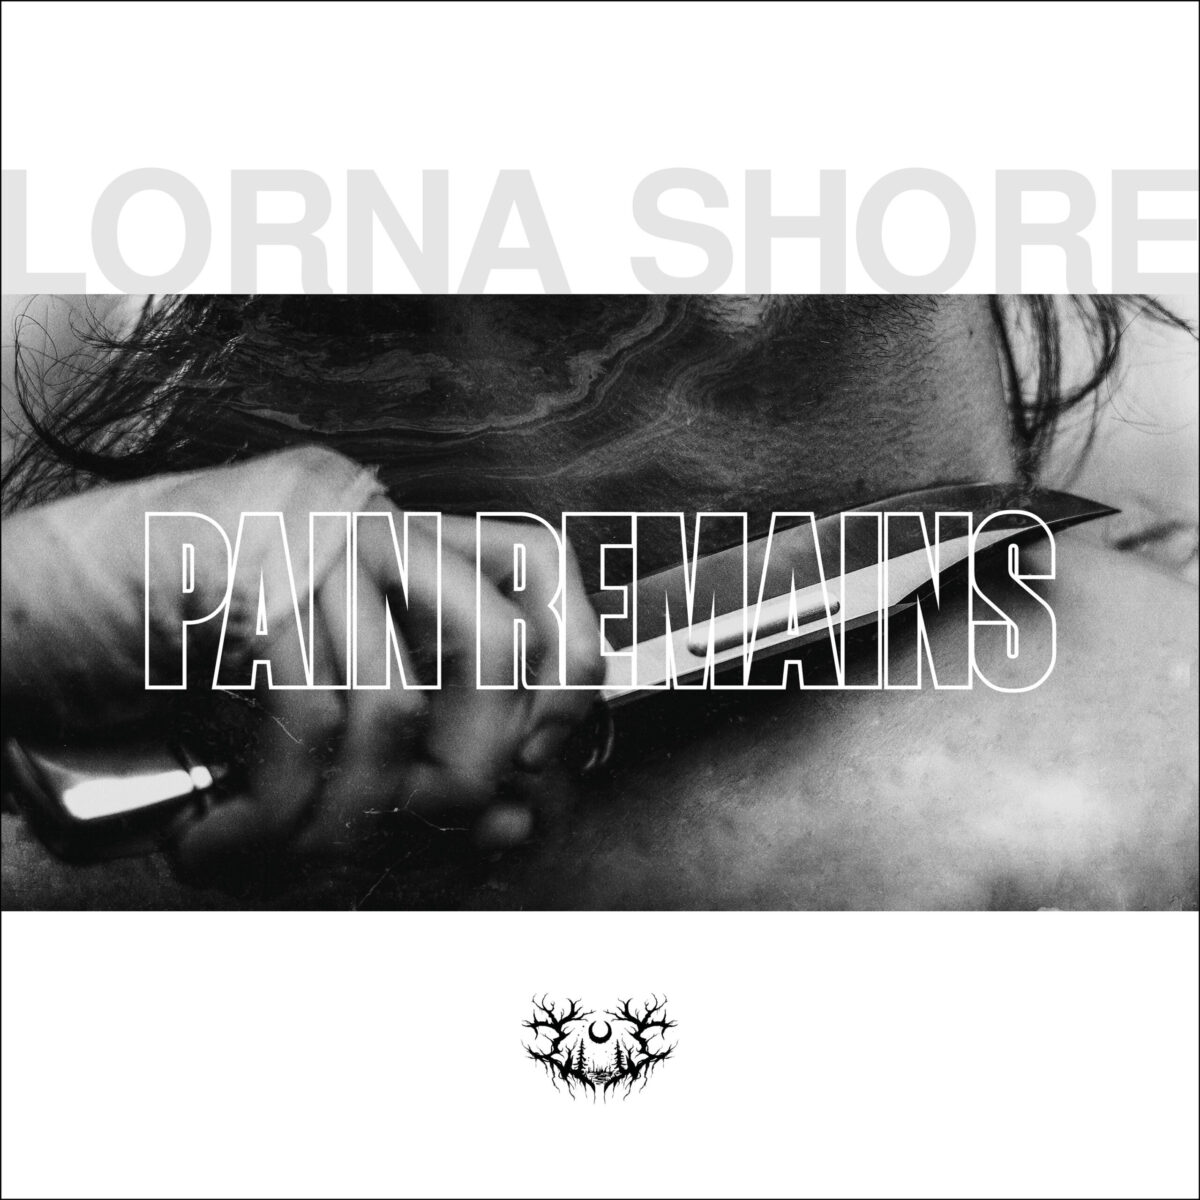 Lorna Shore, "Pain Remains" cover art. Black and white image of someone holding a knife to skin.